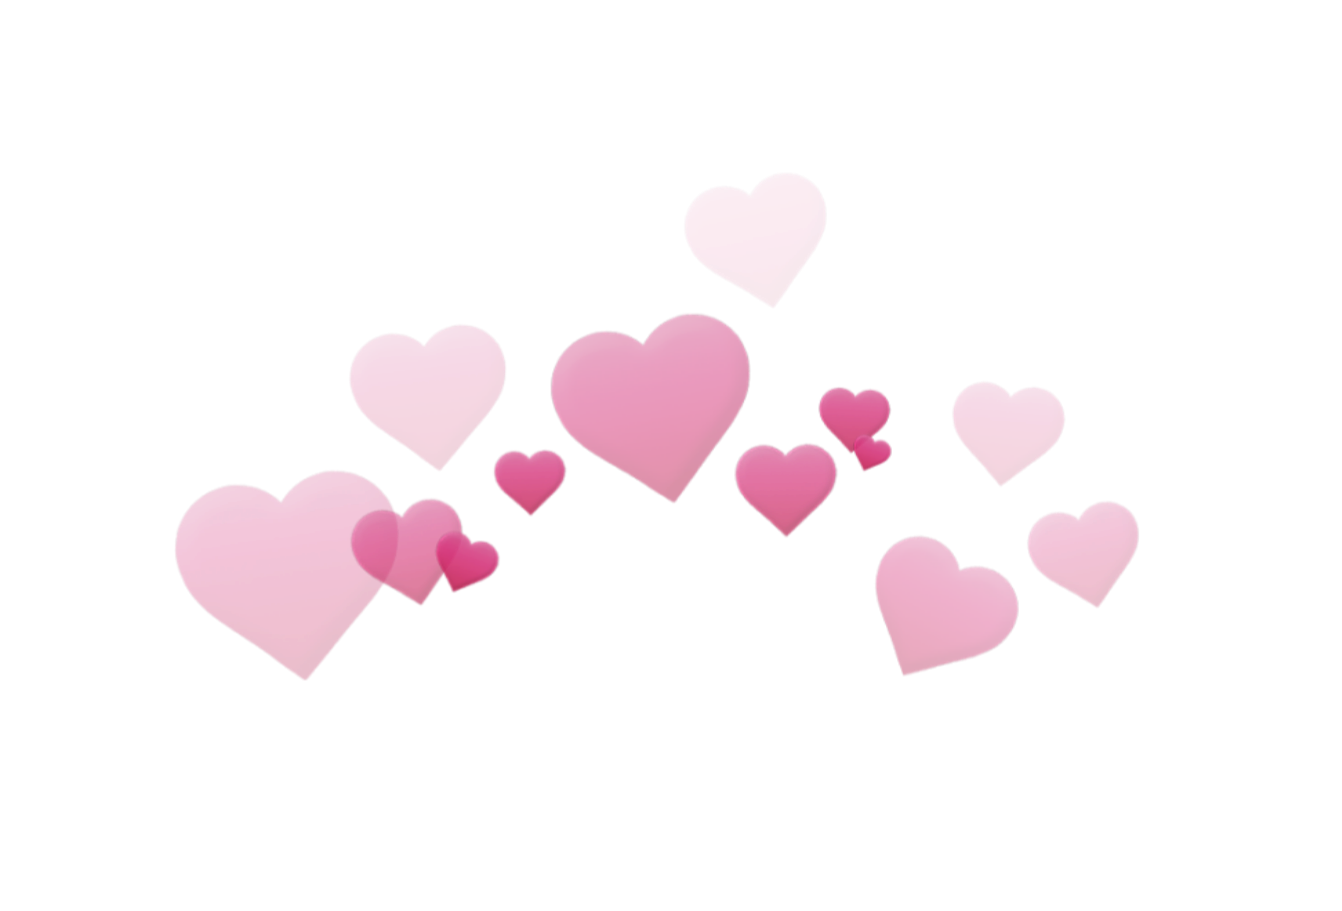 0 Result Images of Heart Crown Png Transparent - PNG Image Collection